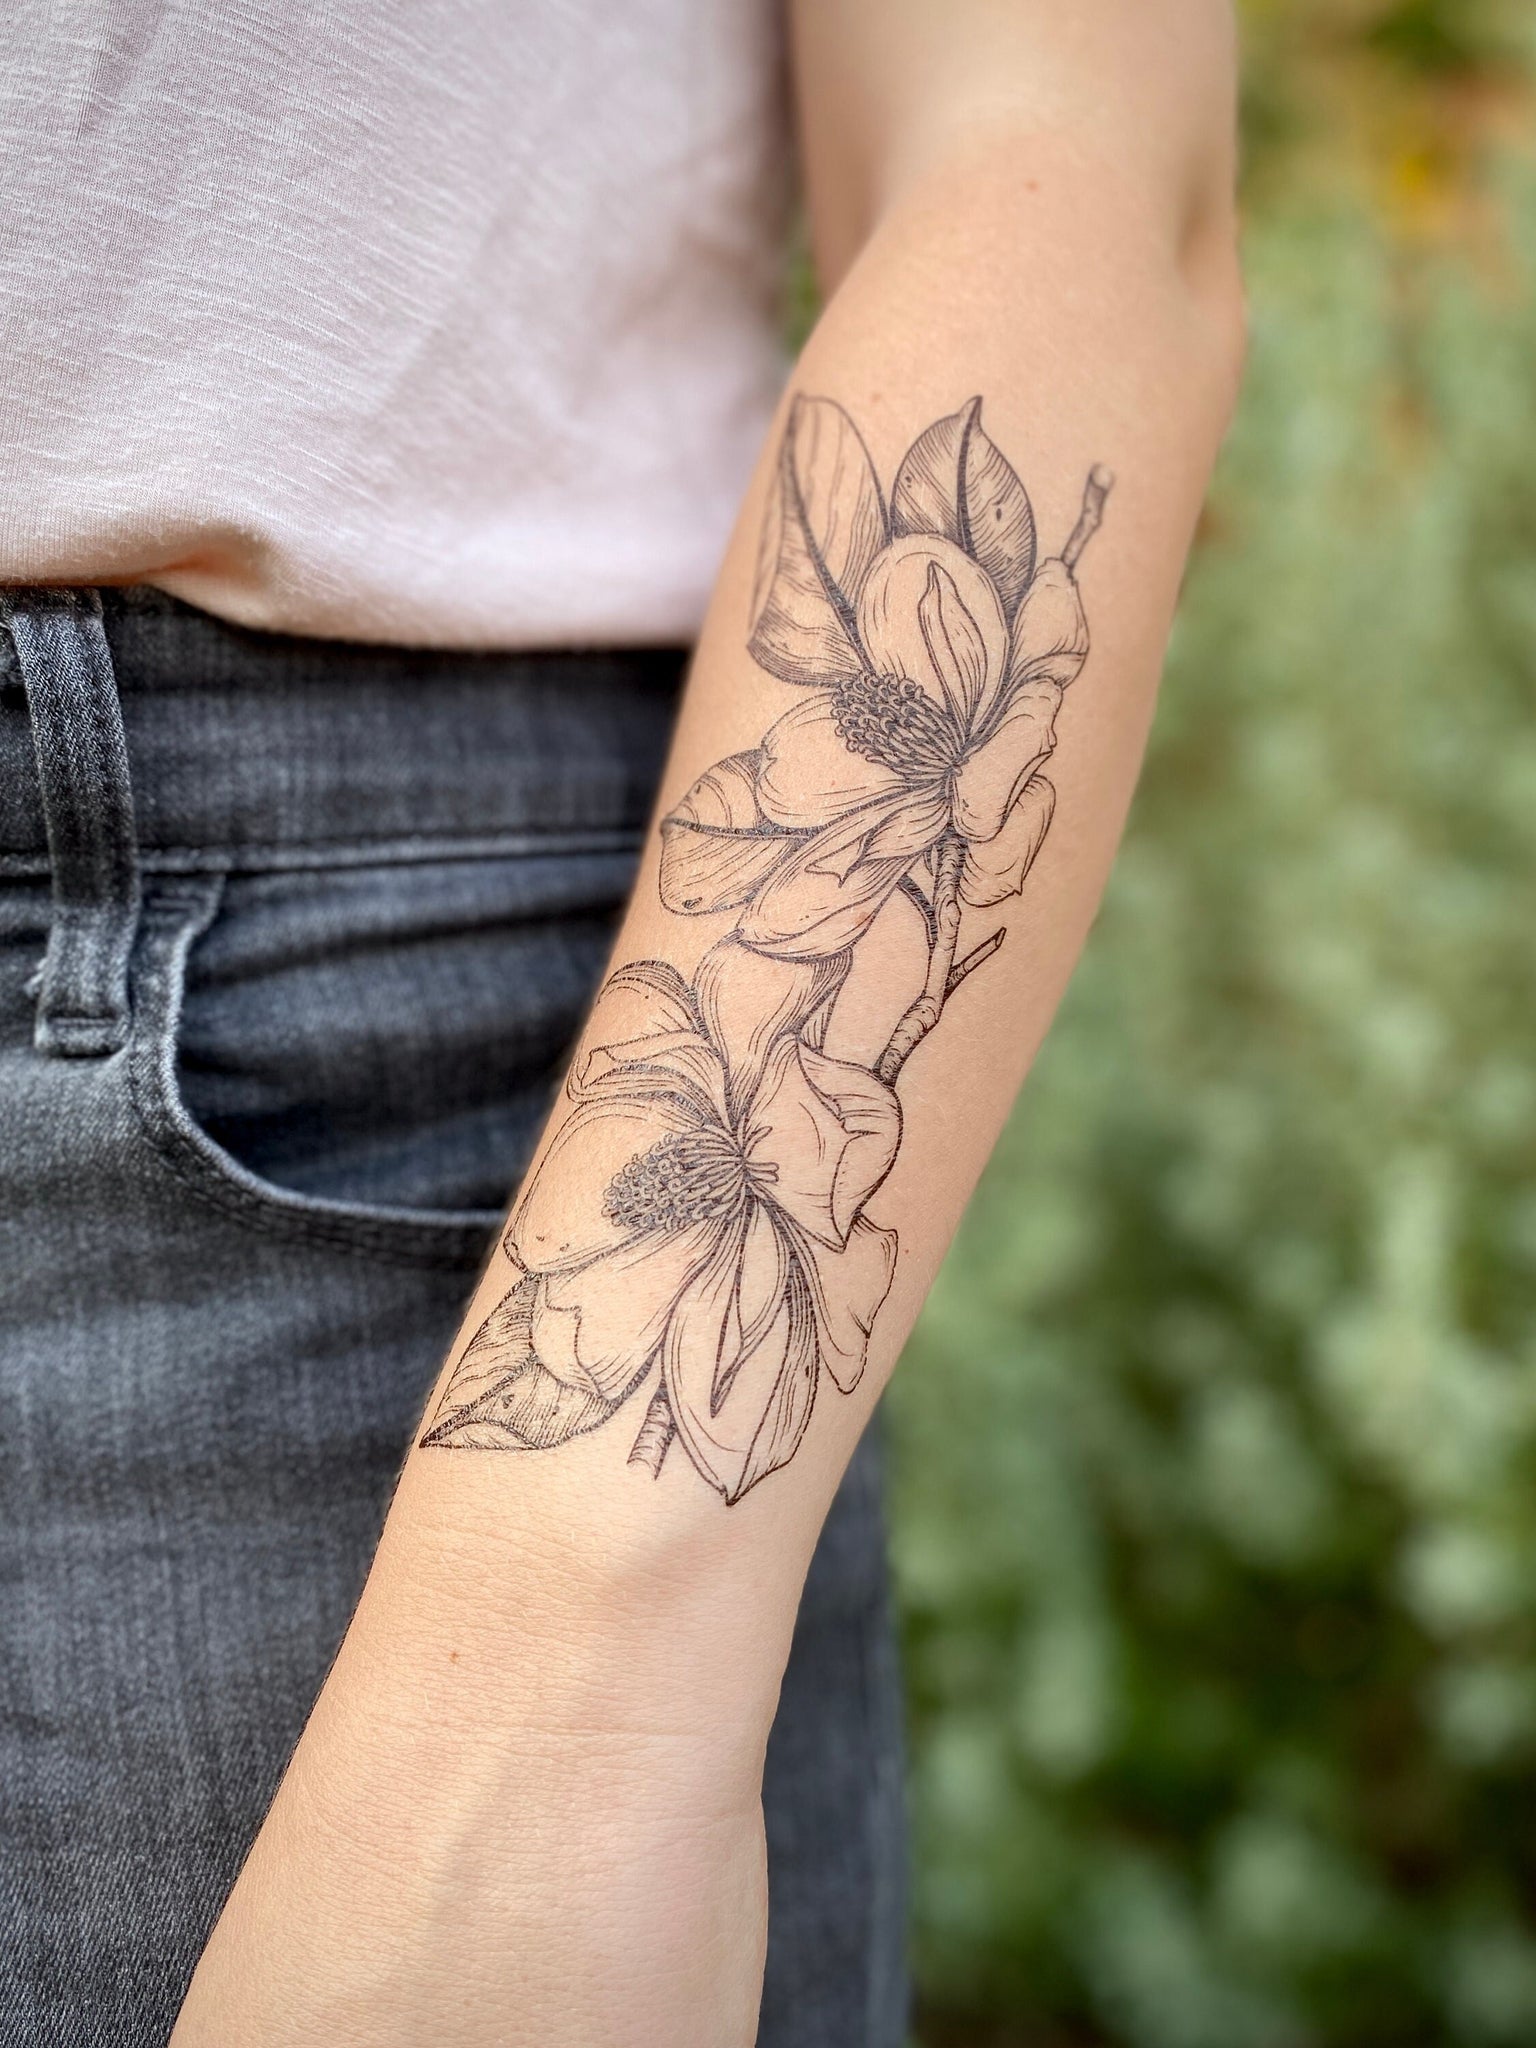 Inksane Tattoos SA - Small flower done by Angie 🌷🌷 To book with her  contact Inksane Tattoos SA 082 411 4345 Body Graphics Tattoo Supply South  Africa @salvage_cartridge_za #smallflowertattoo #floraltattoo #flowertattoo  #smalltattoo #